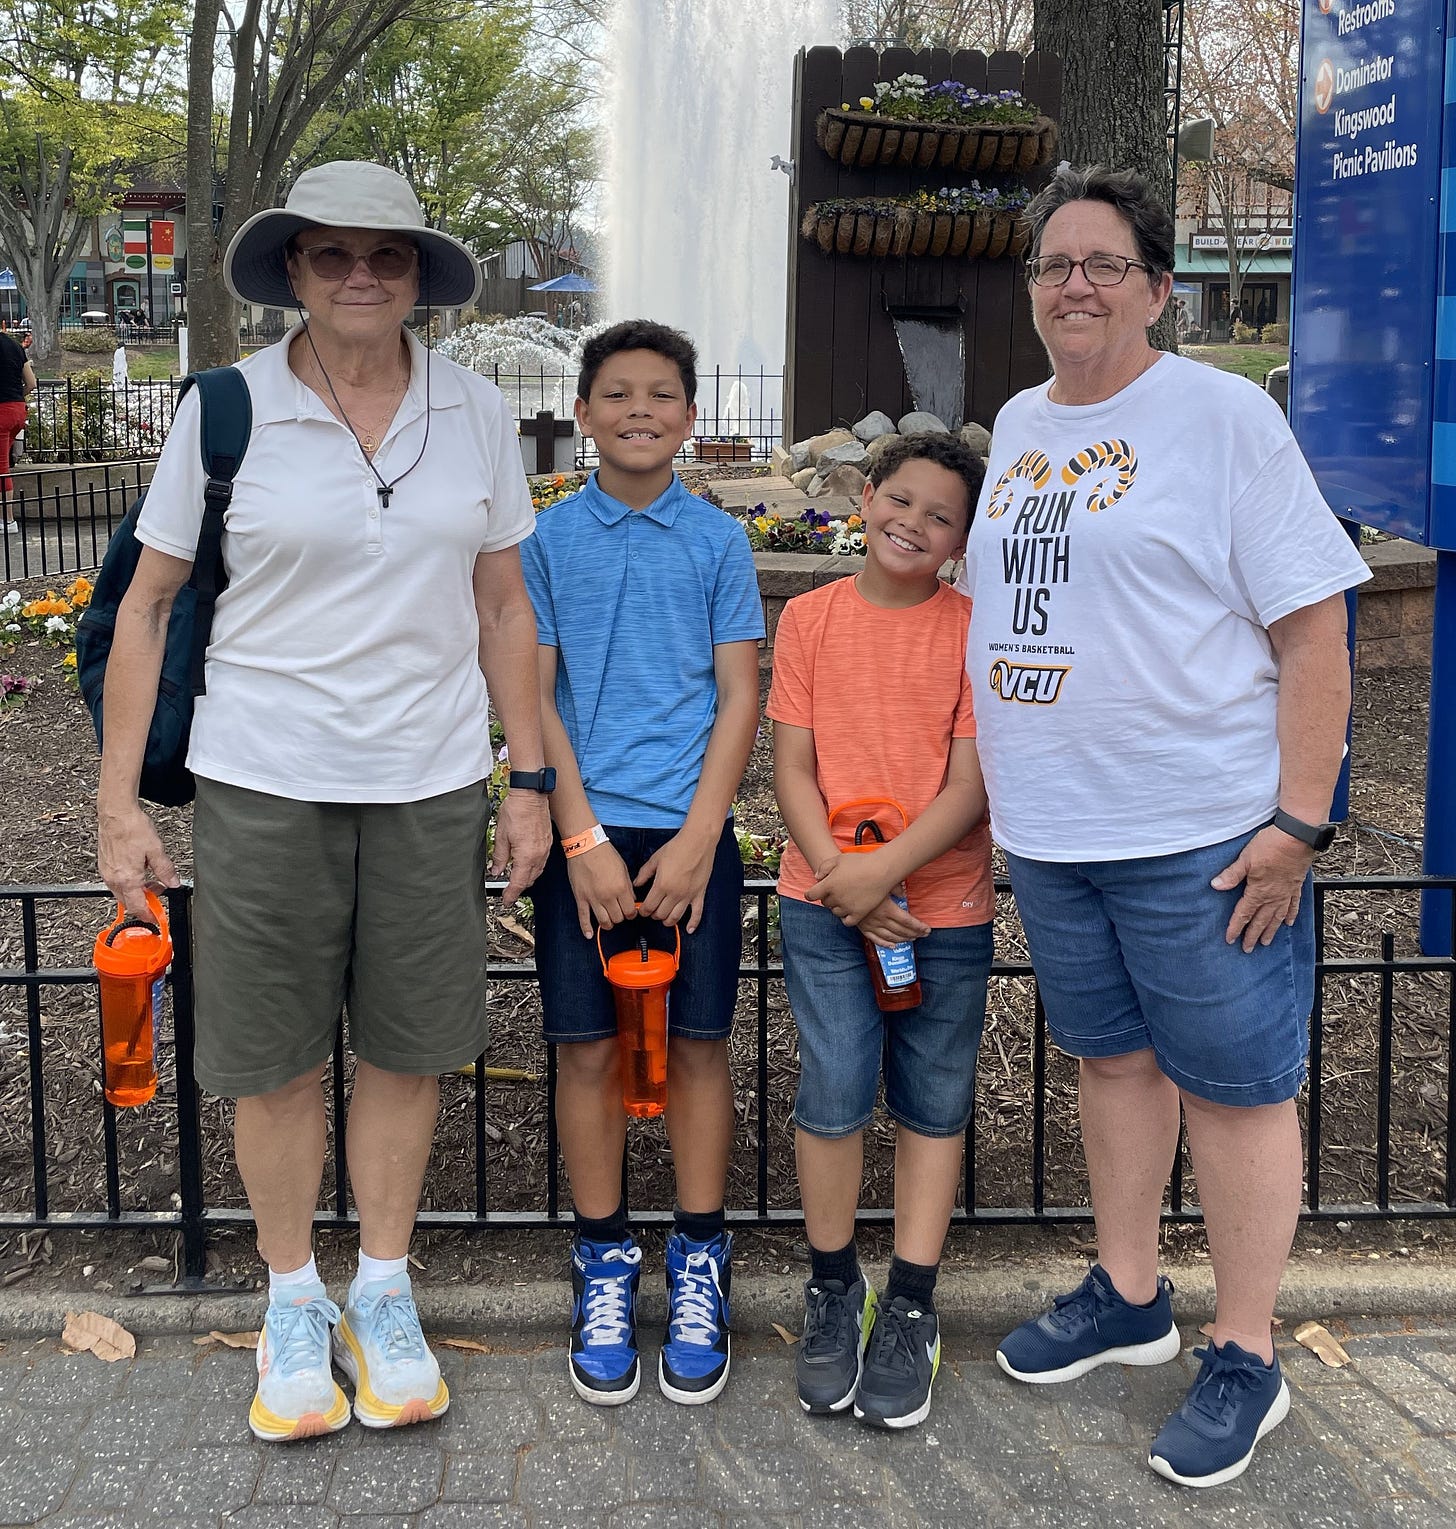 Two older women and two young boys at an amusement park